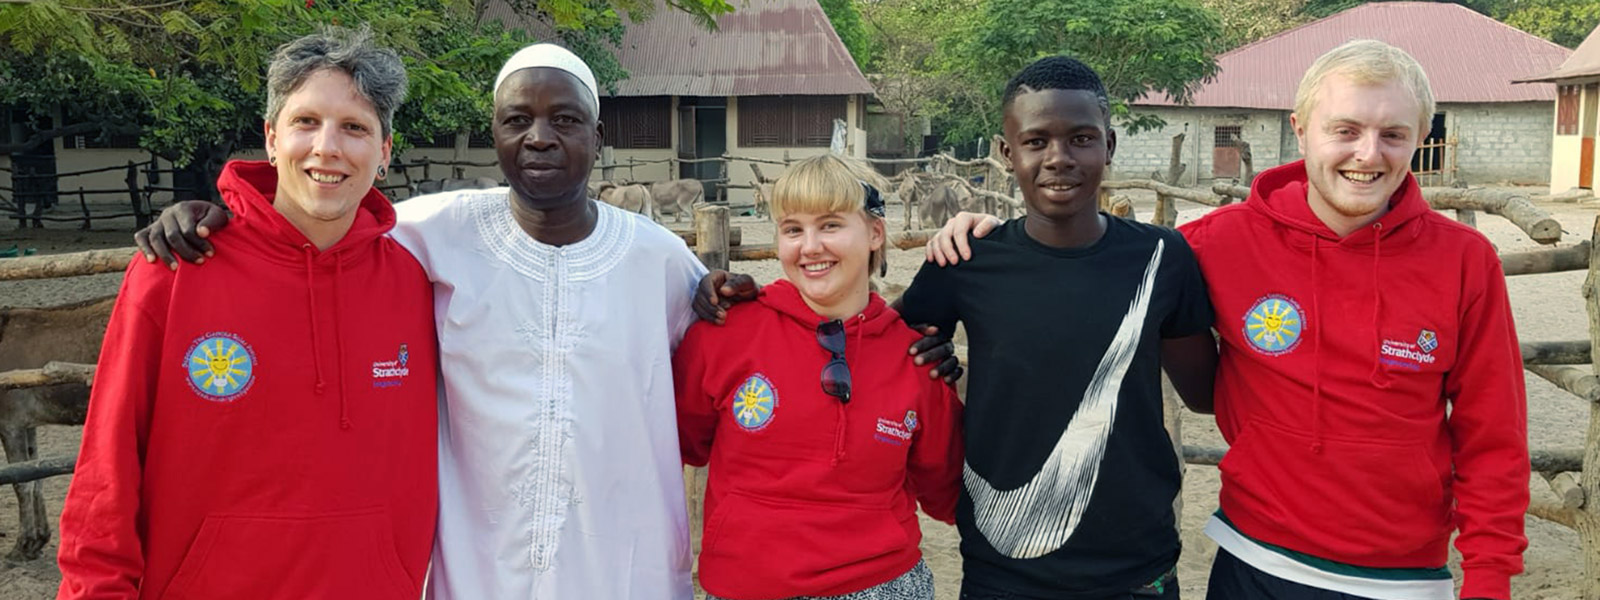 Strathclyde students Callum Taylor, Emma Tate and Steven Nolan with Kembujeh with local people in Kembujeh.